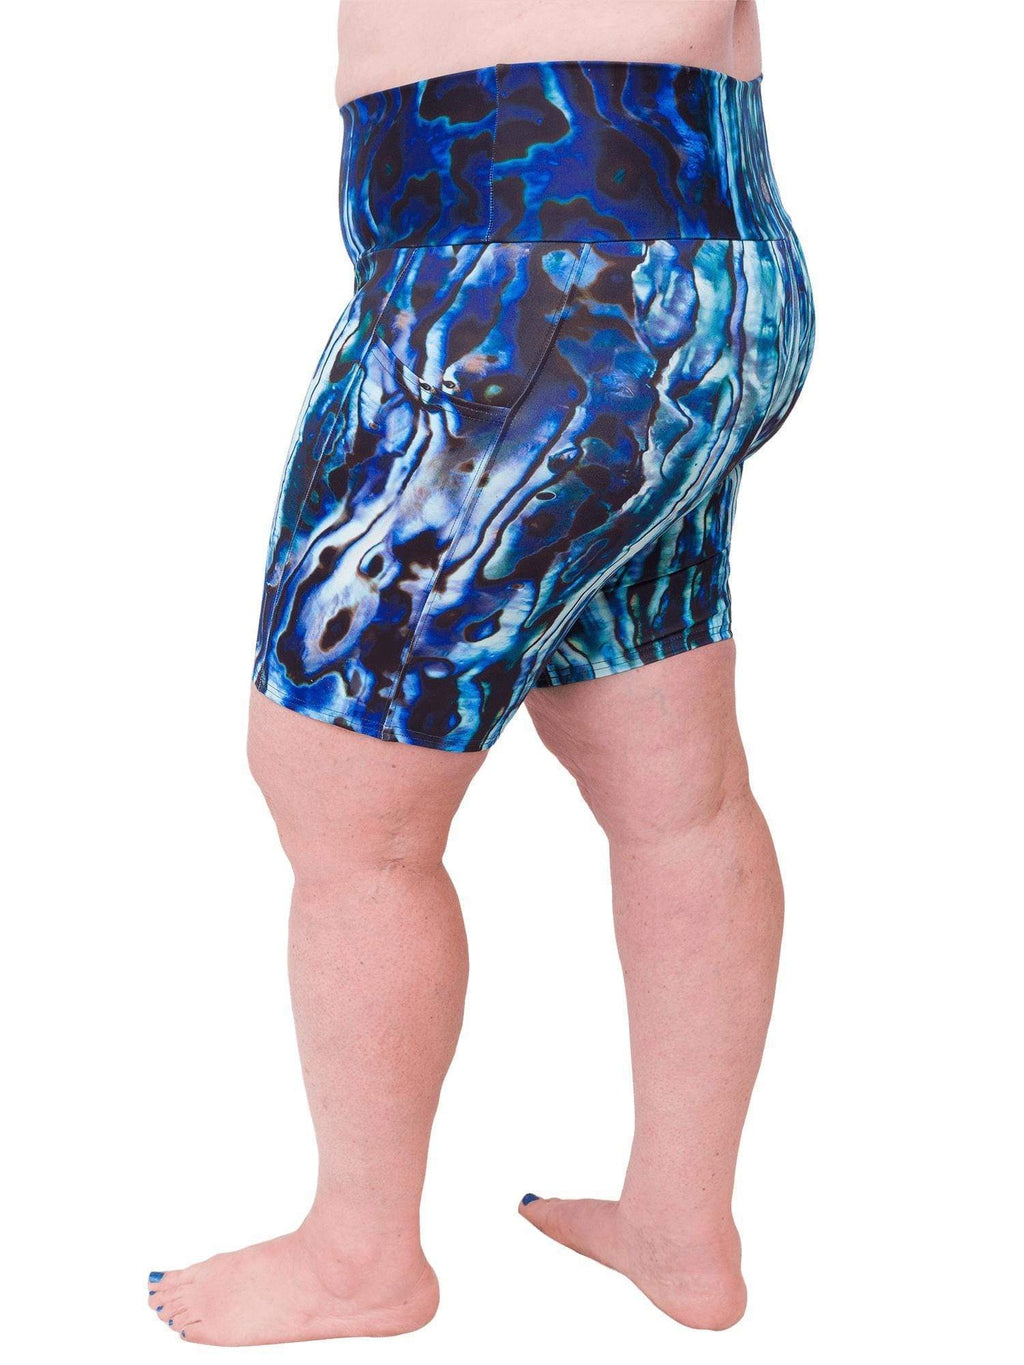 Model: Ruth volunteers for citizen science projects on both salt and freshwater fish and spends as much time as possible in, on, or under the water. She is 5&#39;7&quot;, 217 lbs and is wearing a 2XL.